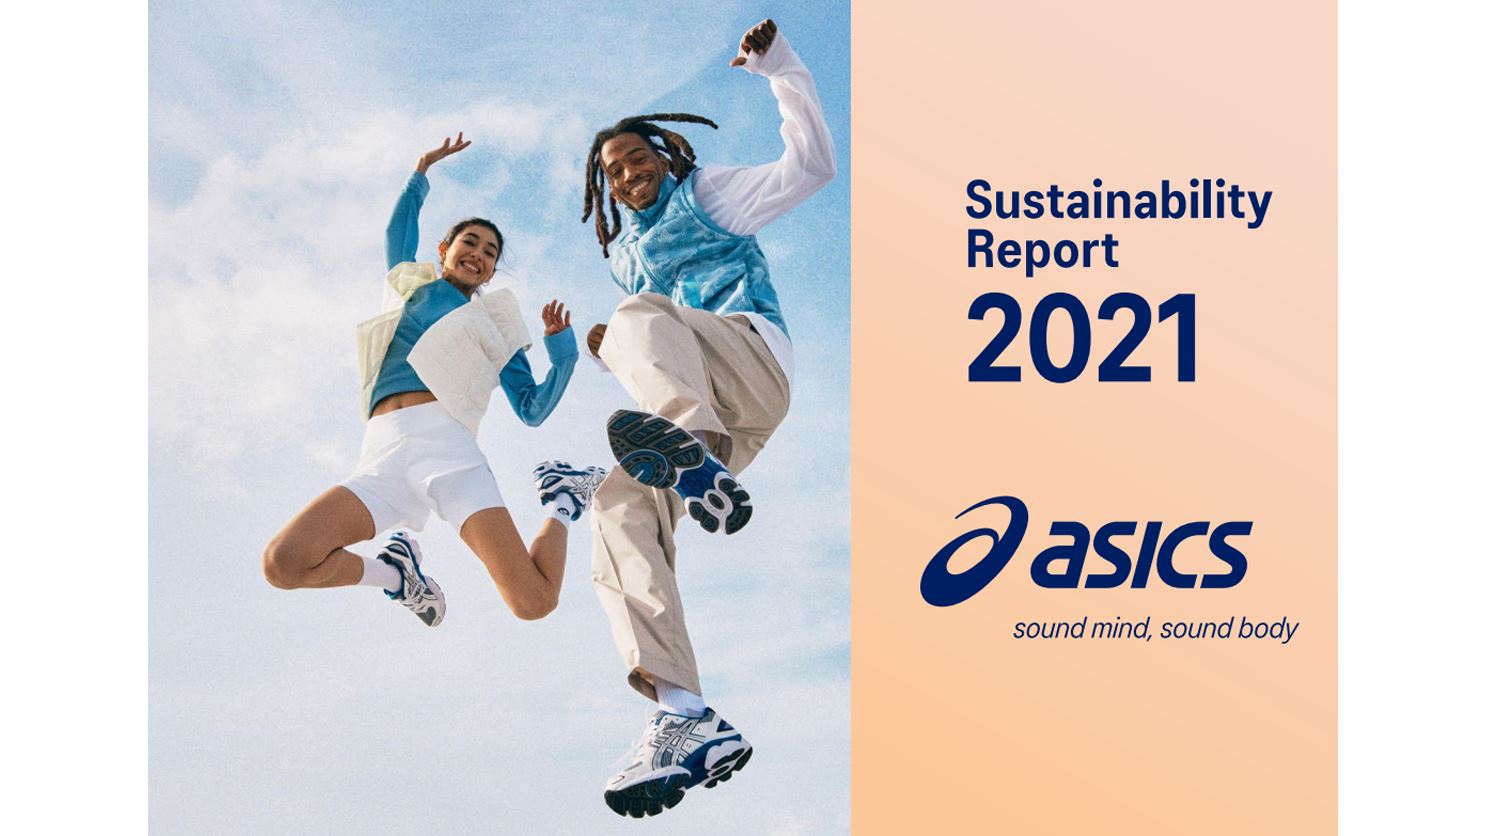 ASICS releases 2021 sustainability report CO2 emissions reductions of 28.0% (direct operations) & 19.7% (supply chains), driven by greater use of recycled polyester